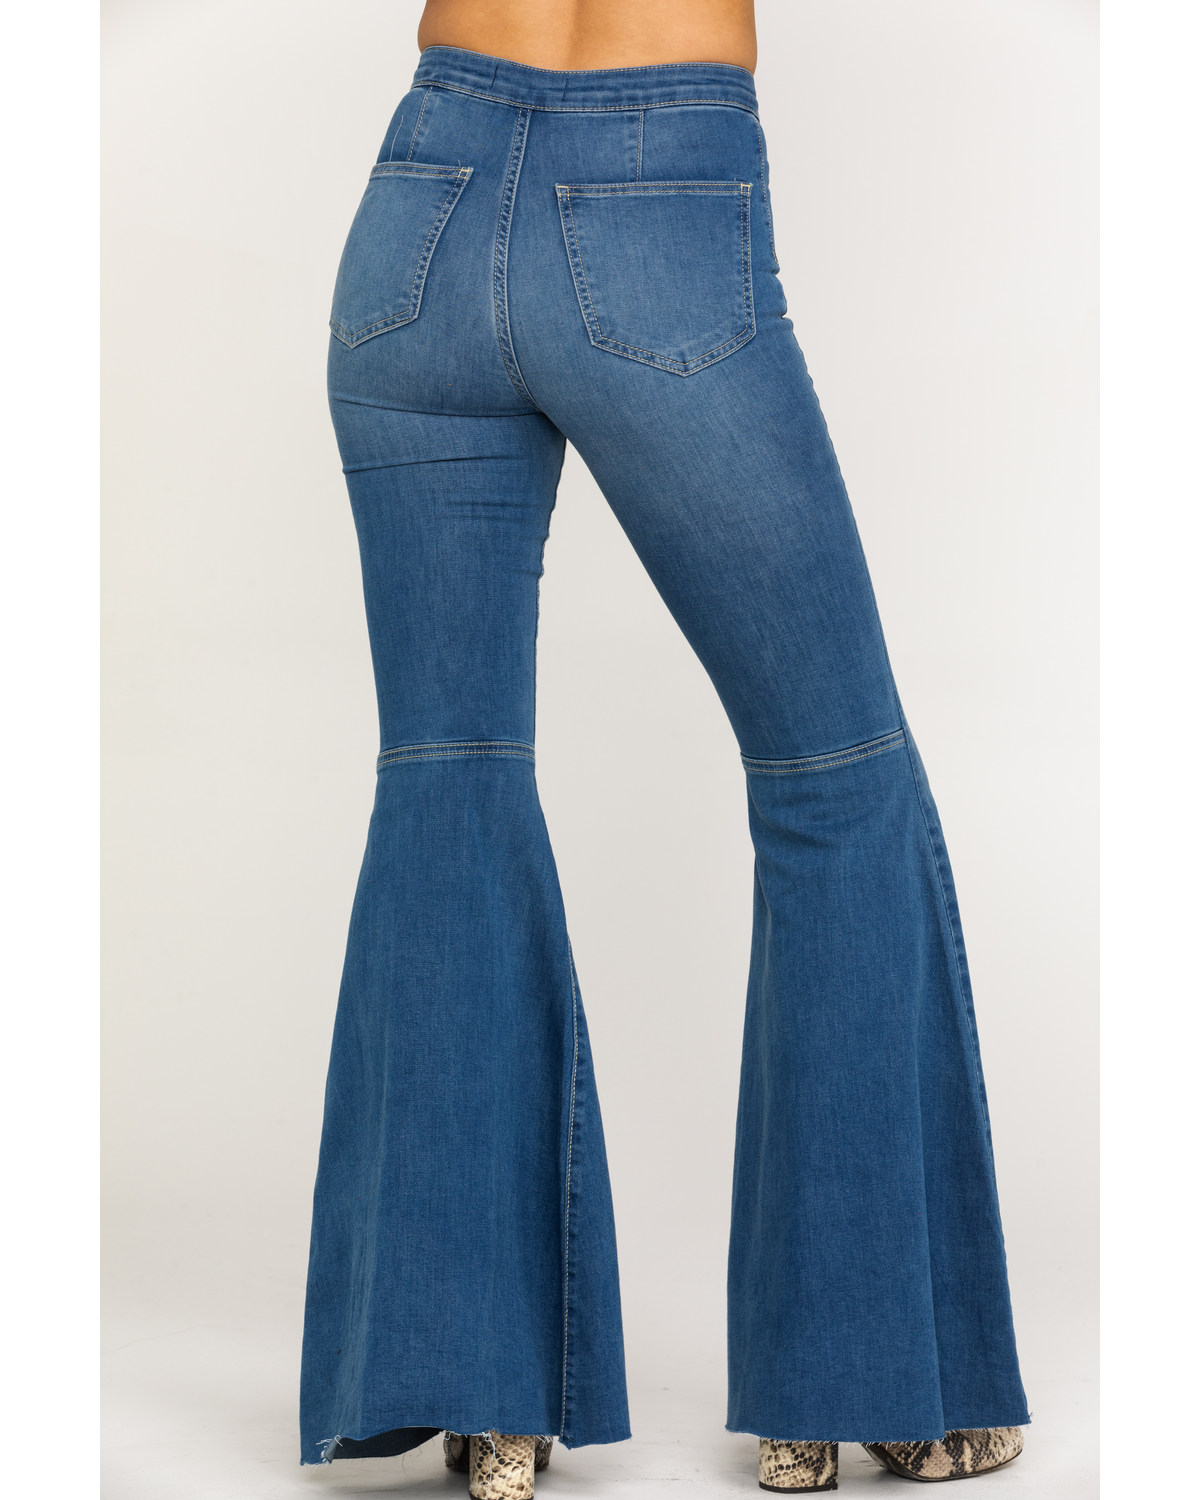 Free People Women's Dark Just Float on Flare Jeans | Boot Barn